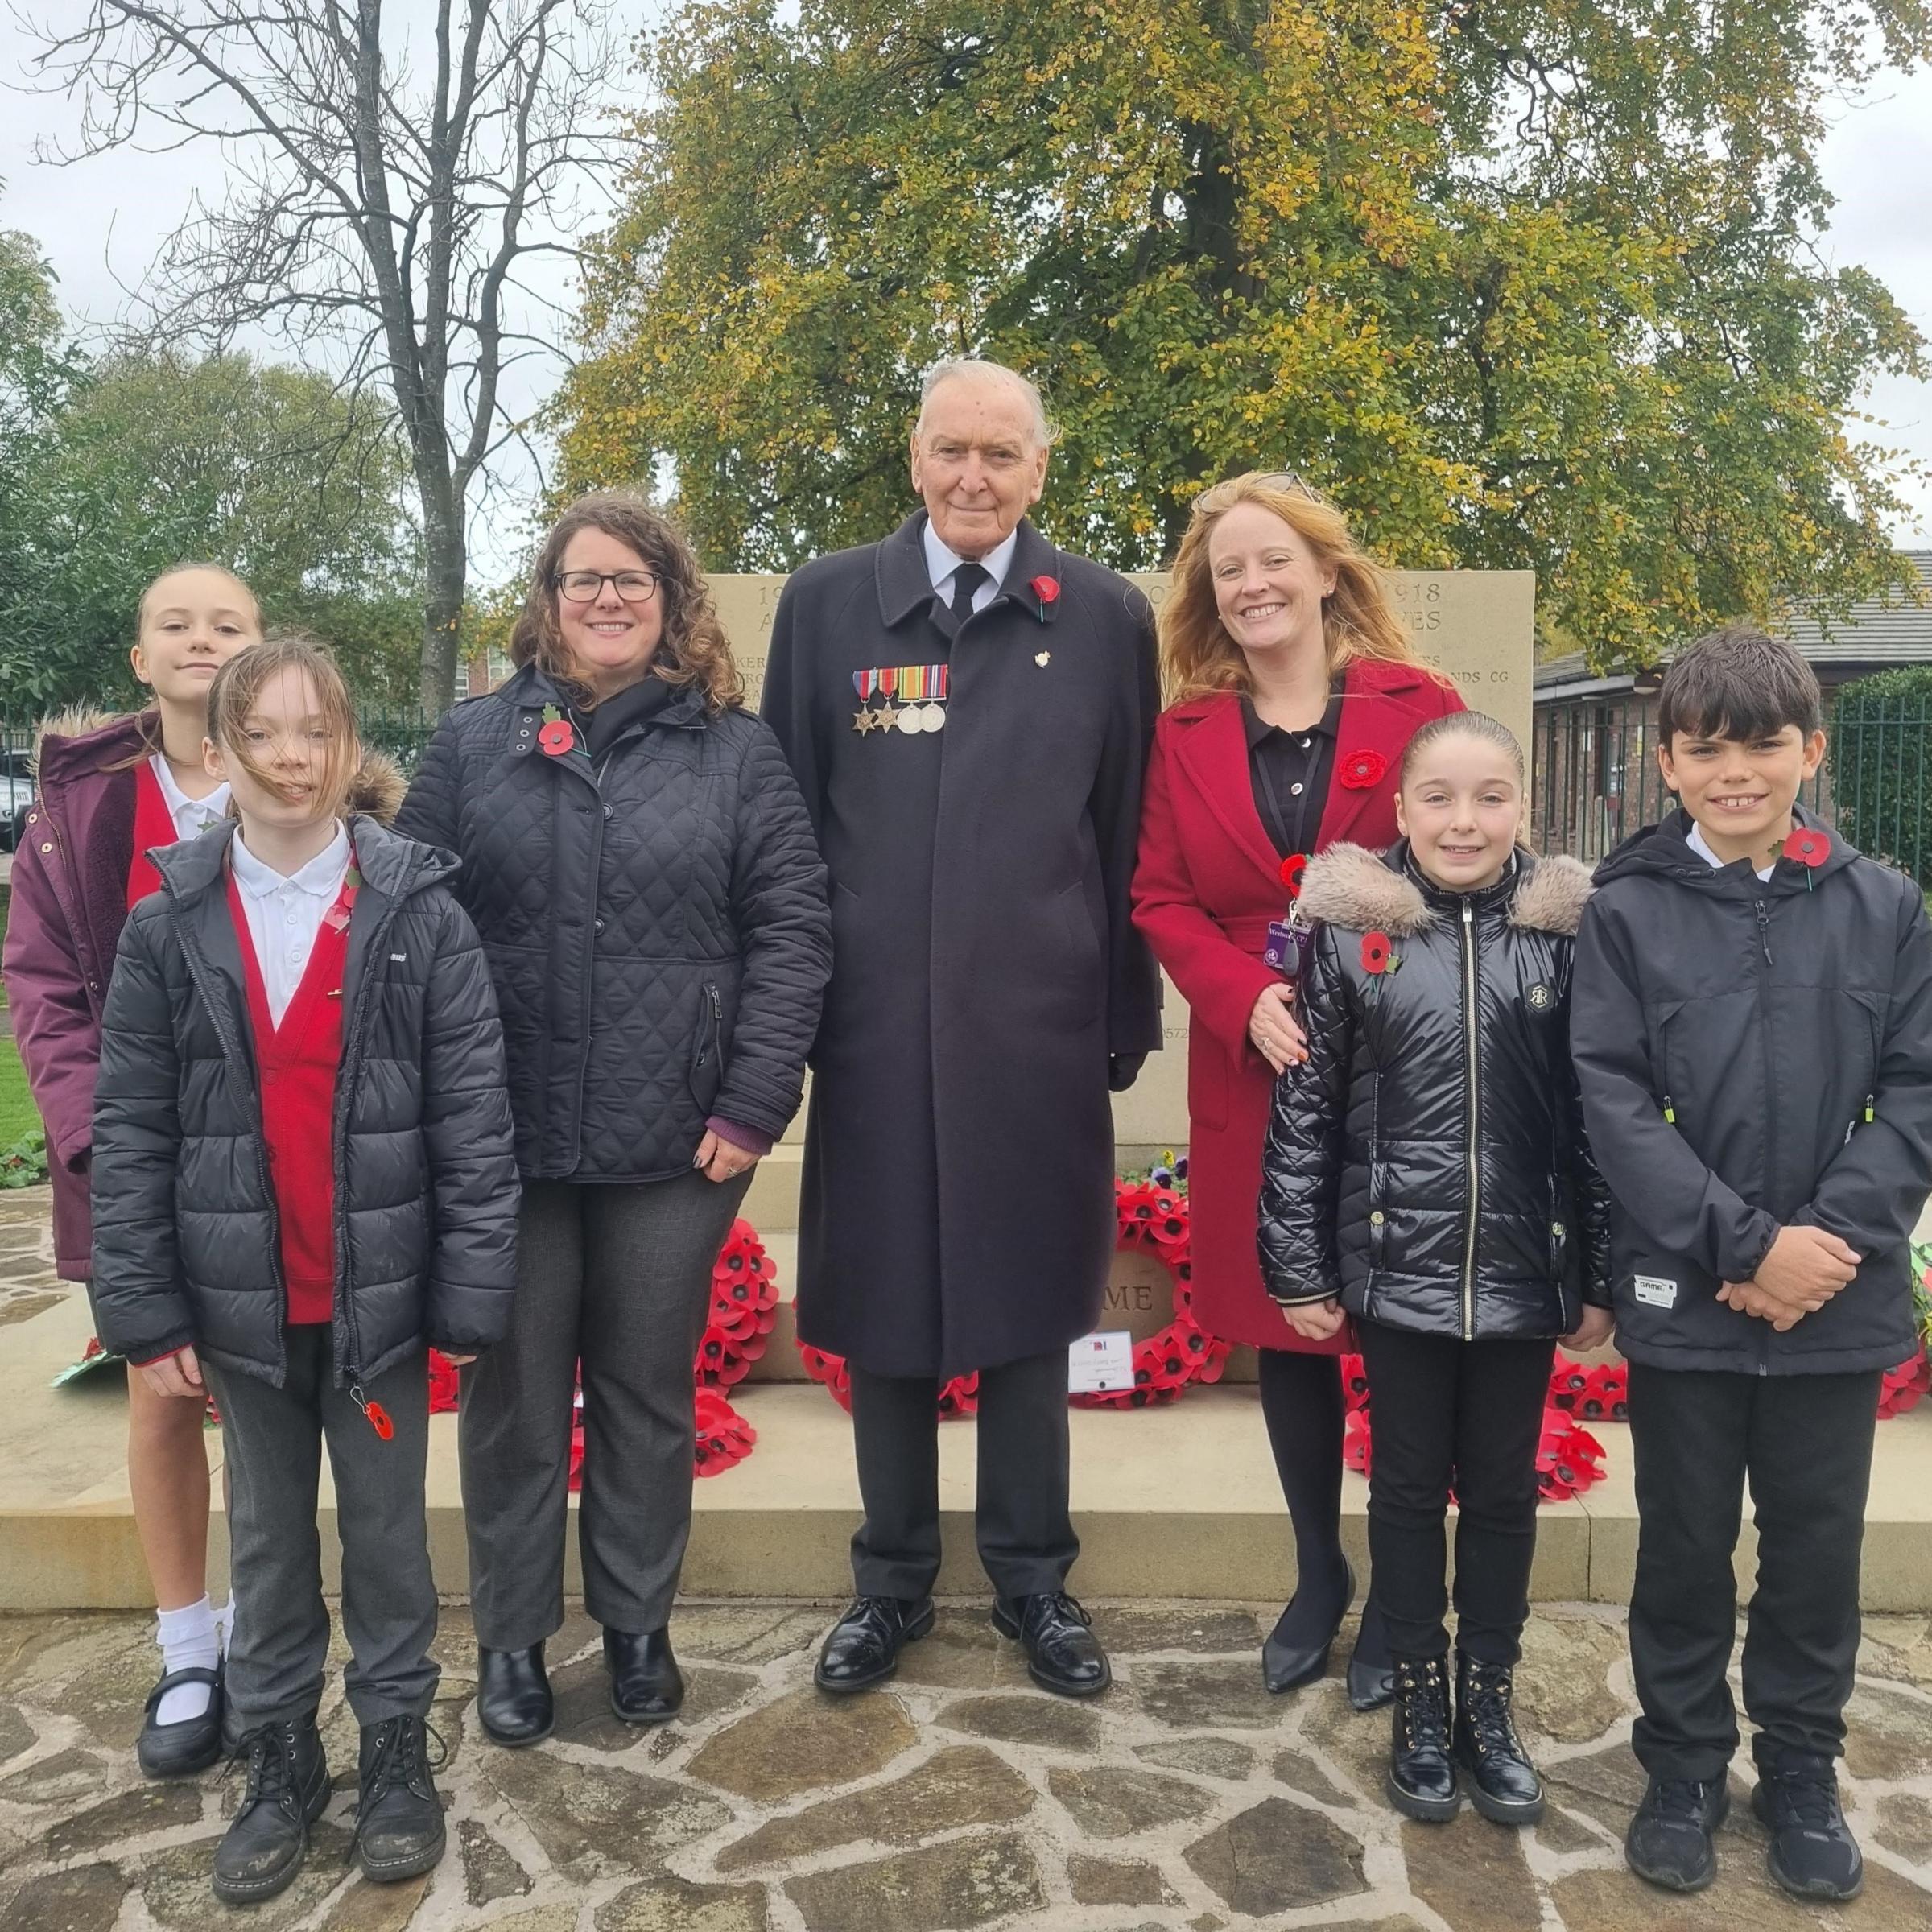 Lord Barry Jones and headteacher Sarah Jones, with pupils from Westwood Primary School.